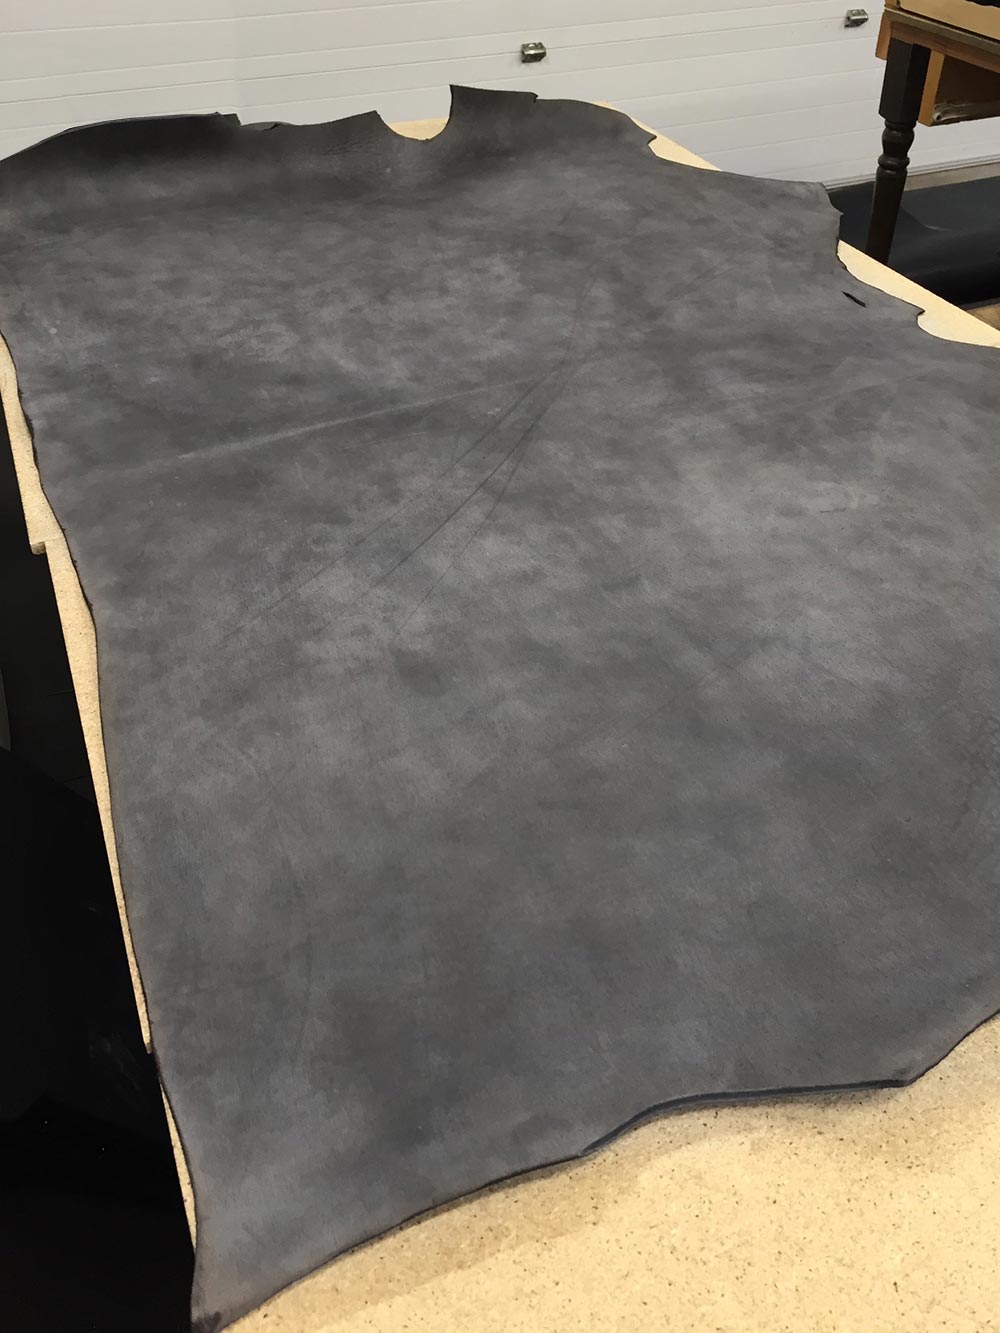 Full piece of distressed leather cowhide ready to be cut into straps to make belts. This is what a belt looks like before you purchase them.